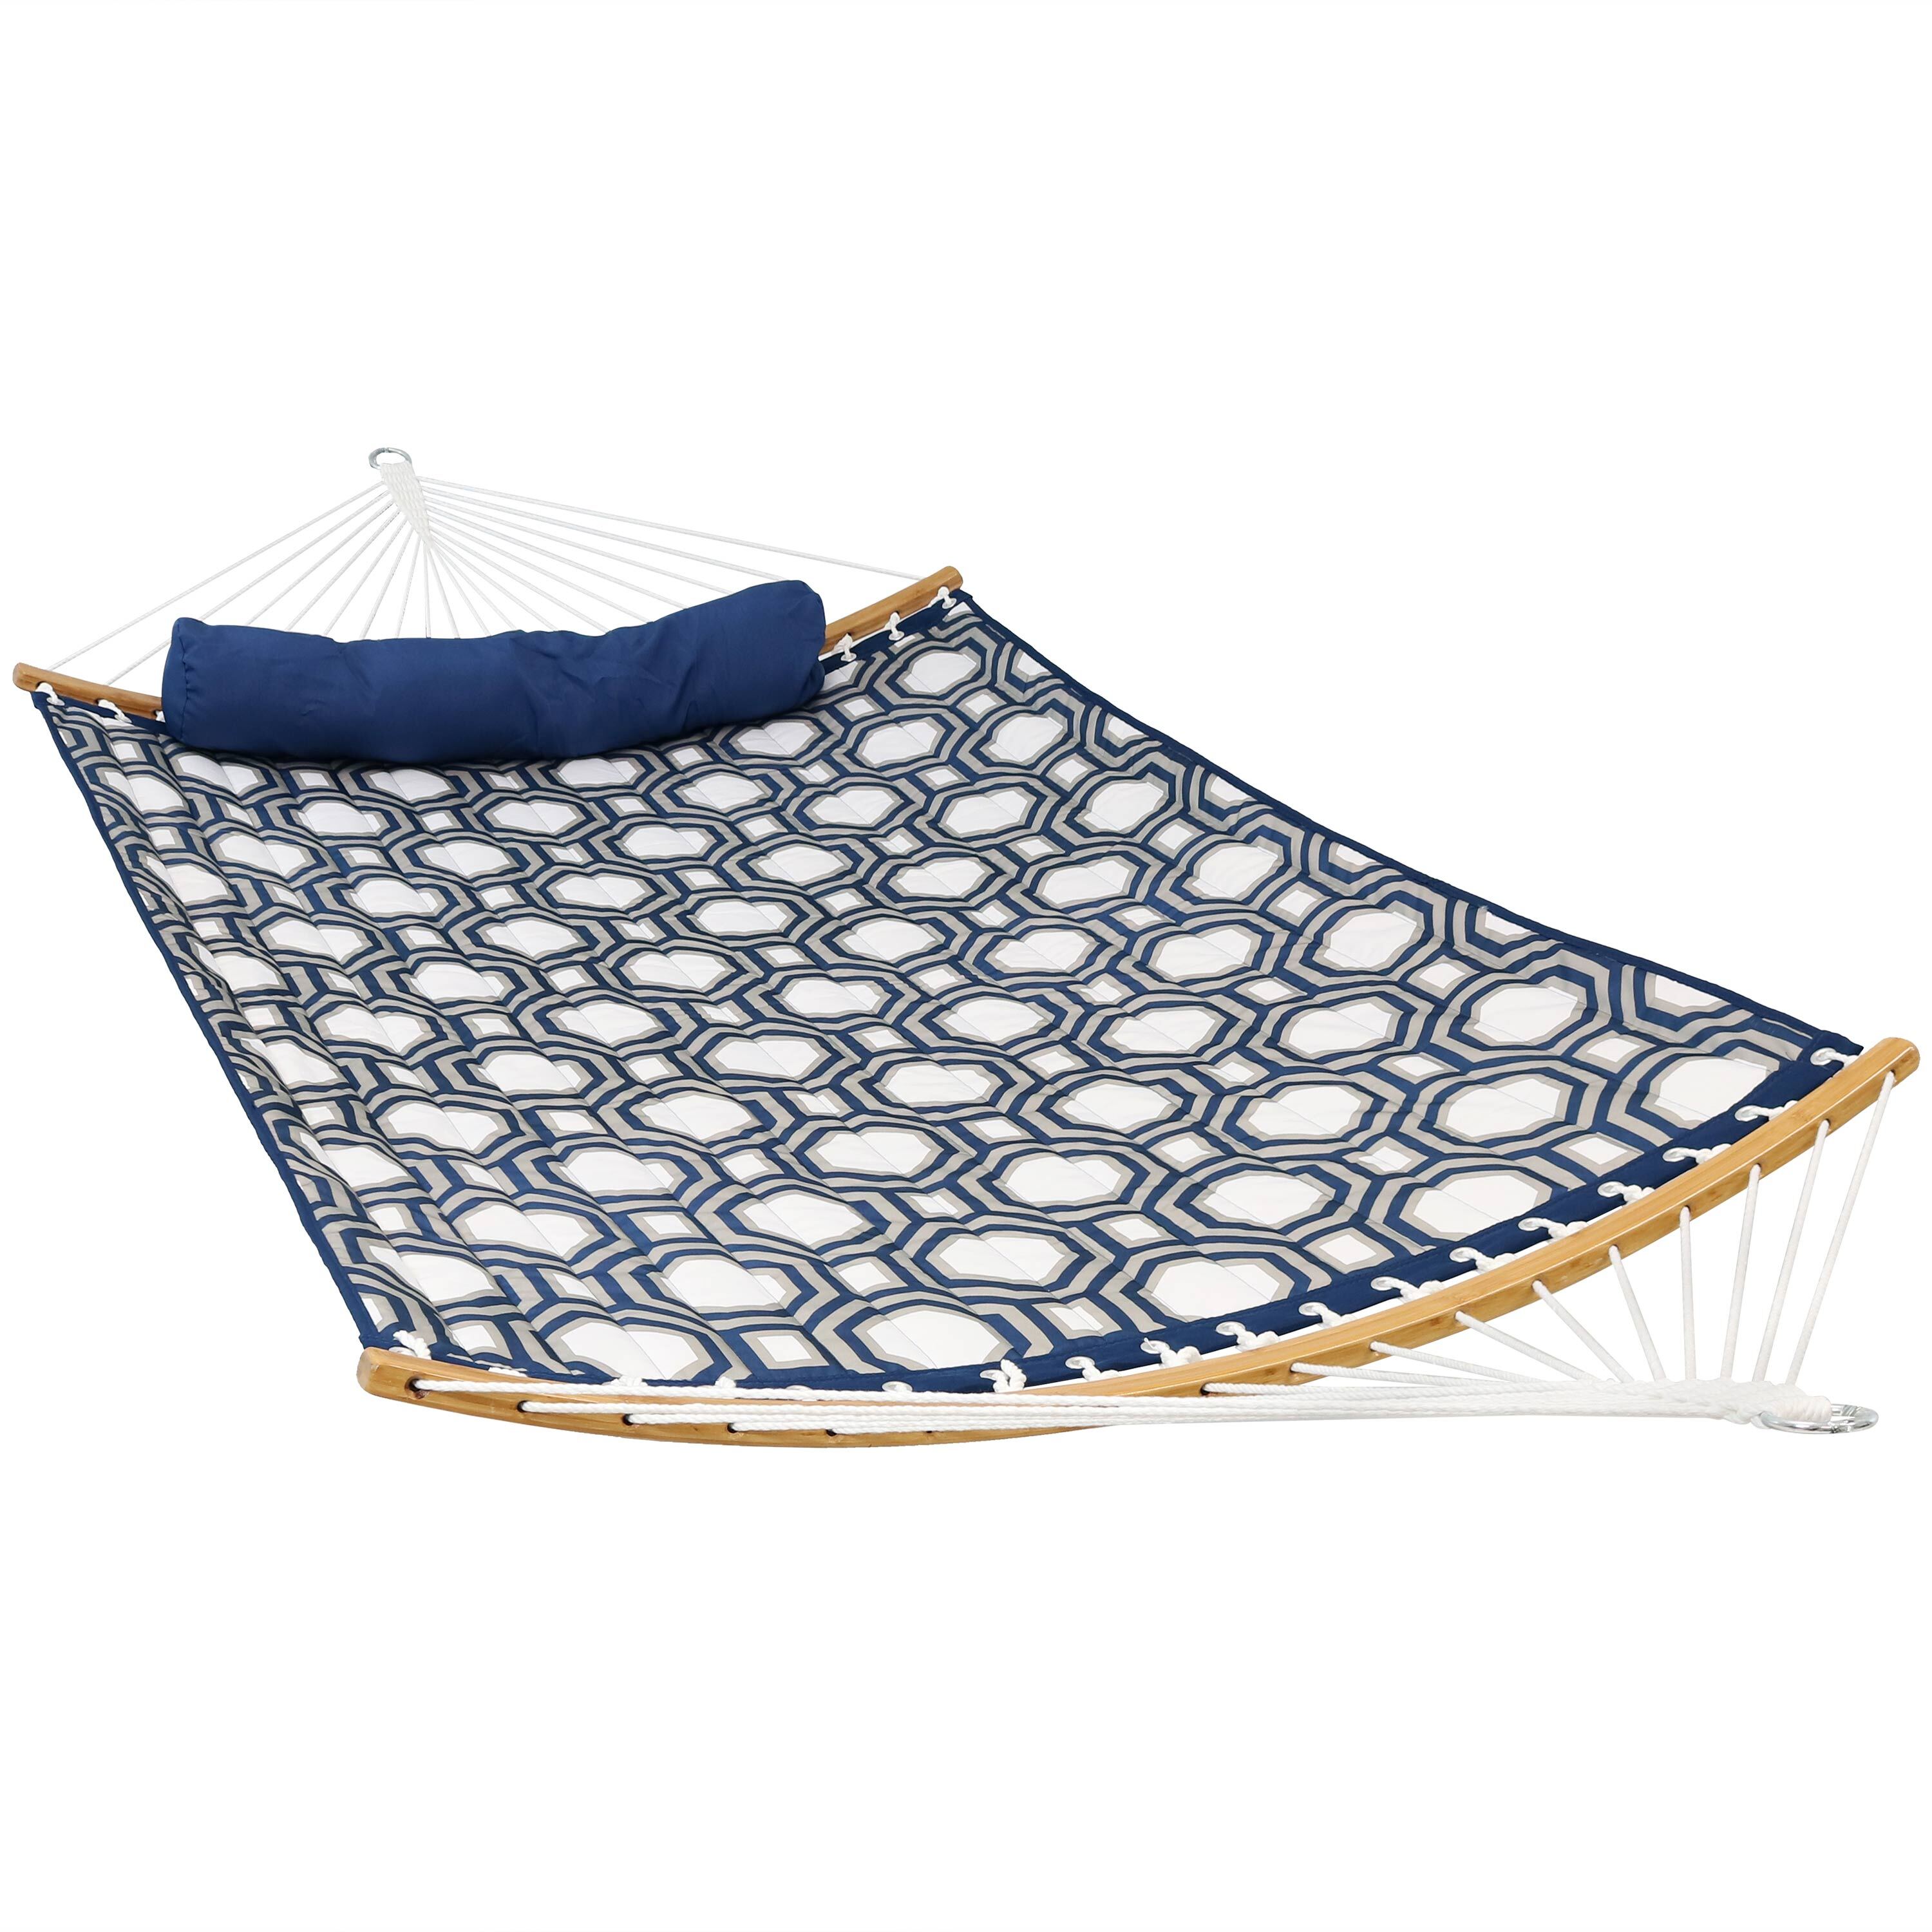 Sunnydaze Decor Quilted Hammock with Curved Spreader Bars Navy and Gray Octagon